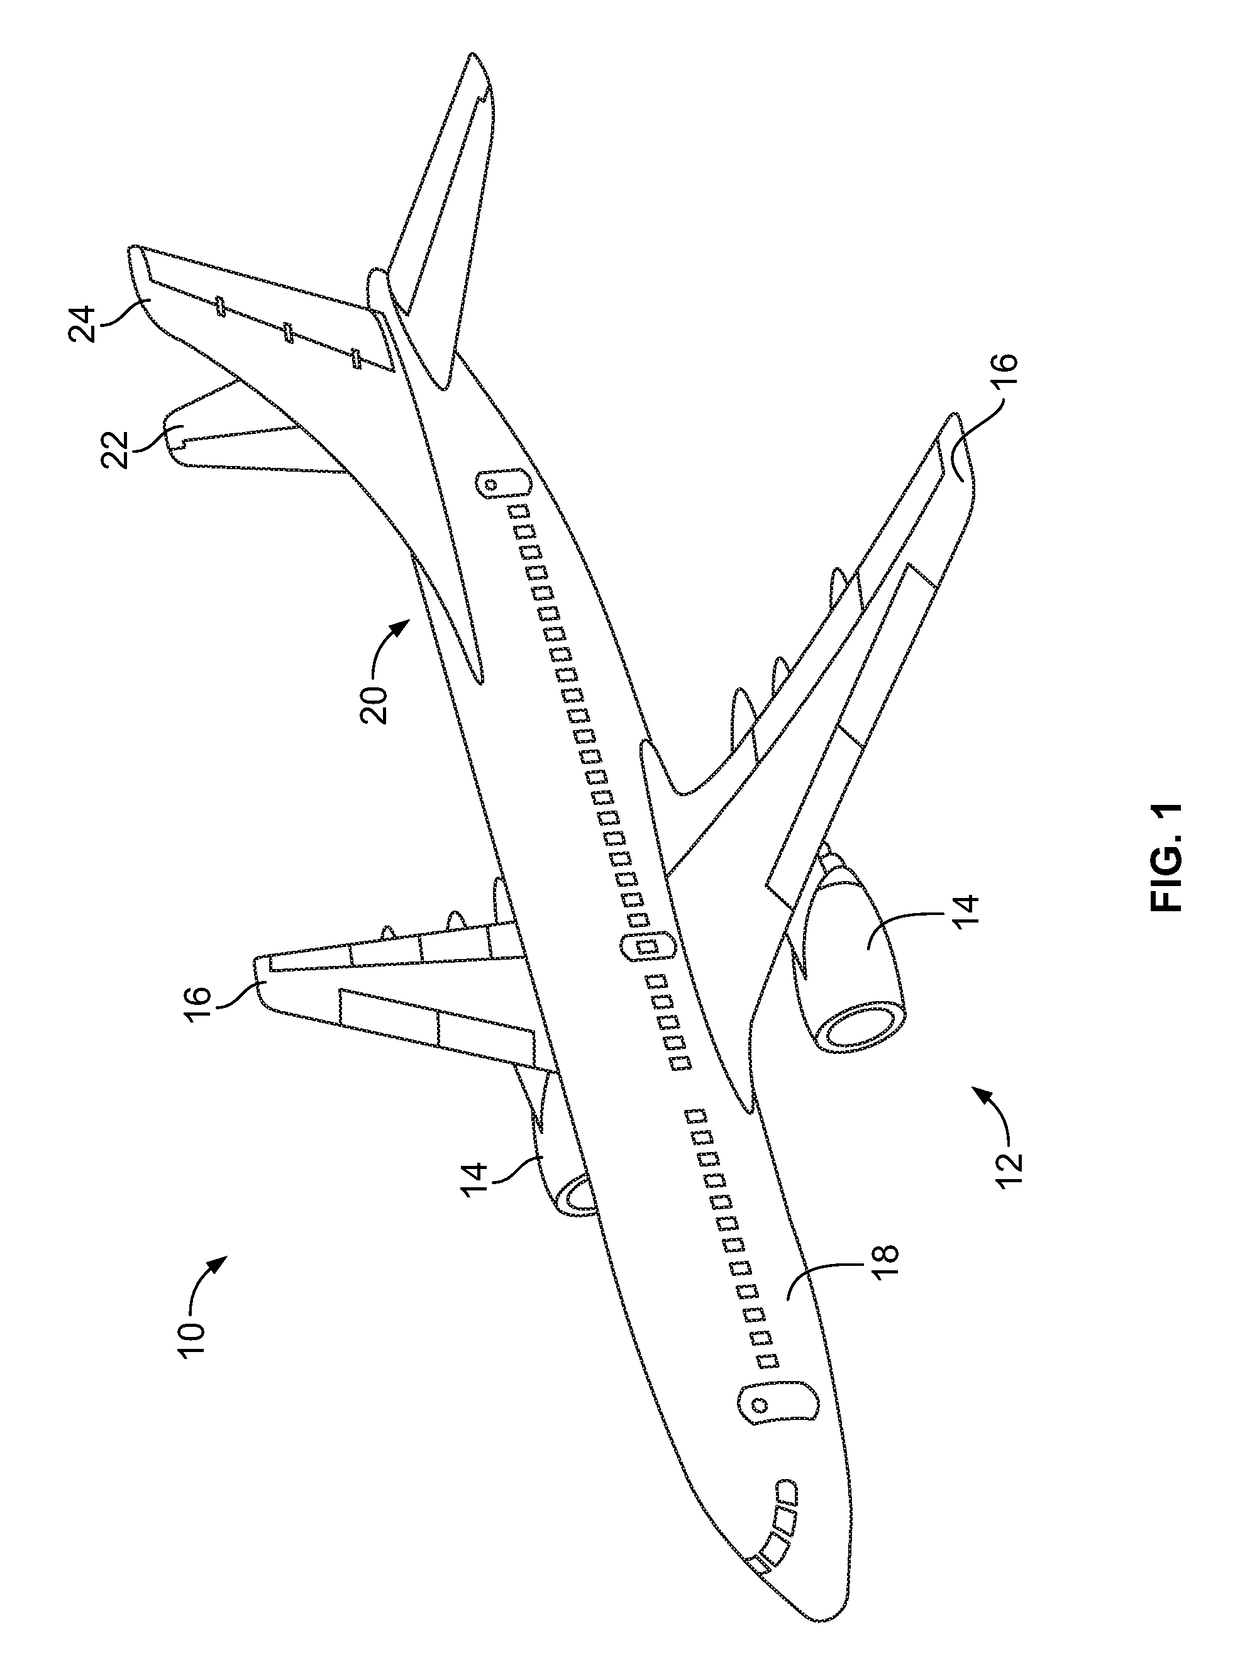 Systems and methods for automatically cleaning a lavatory floor